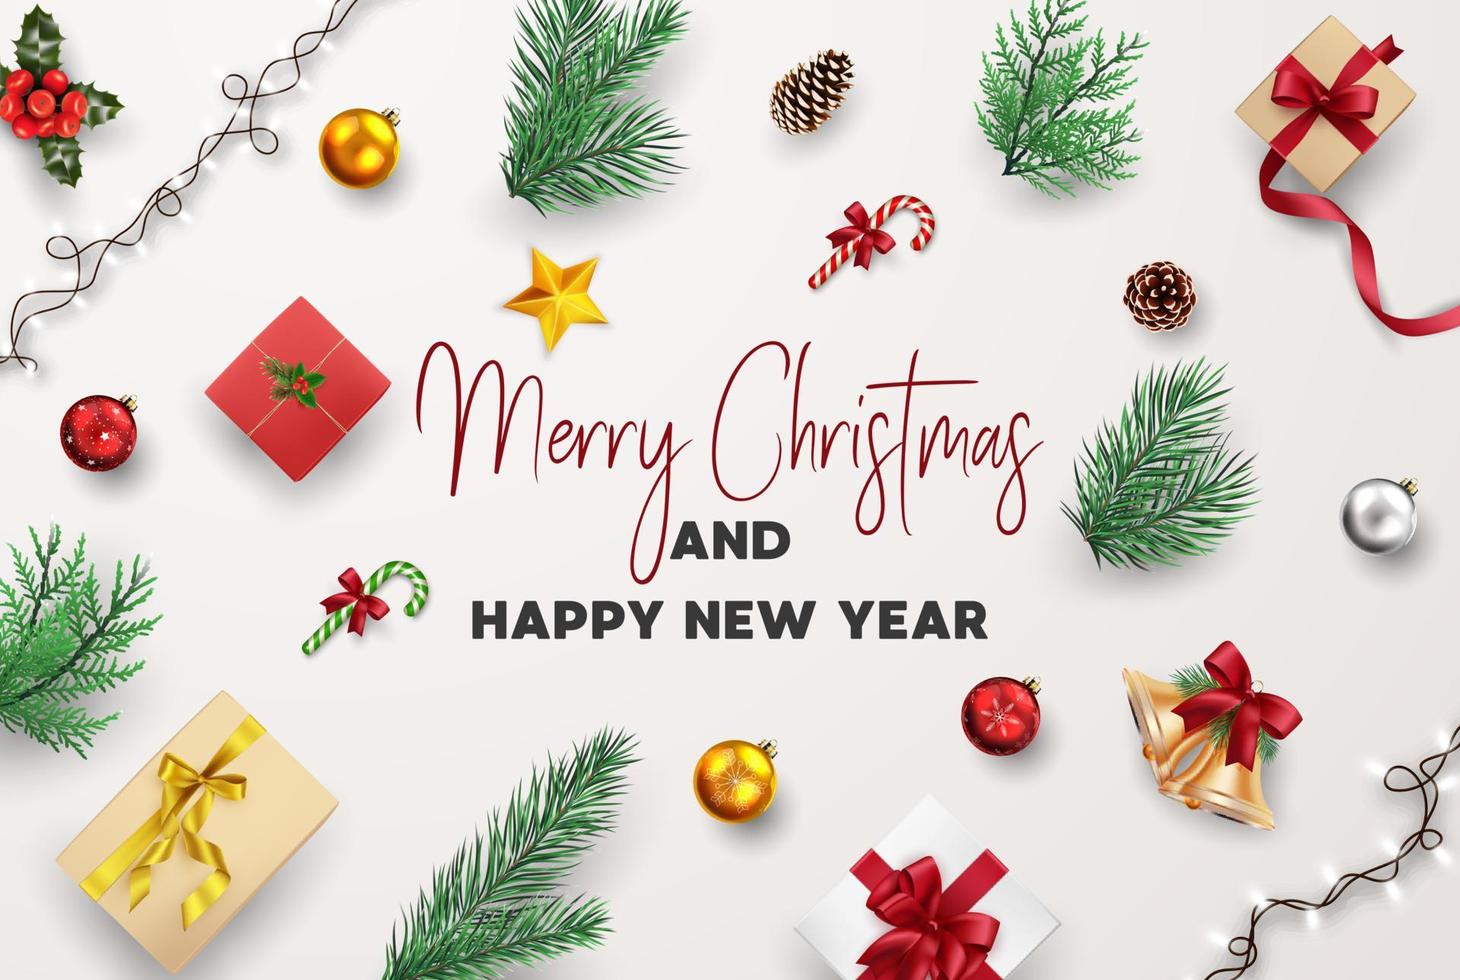 Christmas and Happy new year greeting card Composition of Elements with Christmas Decorations. vector